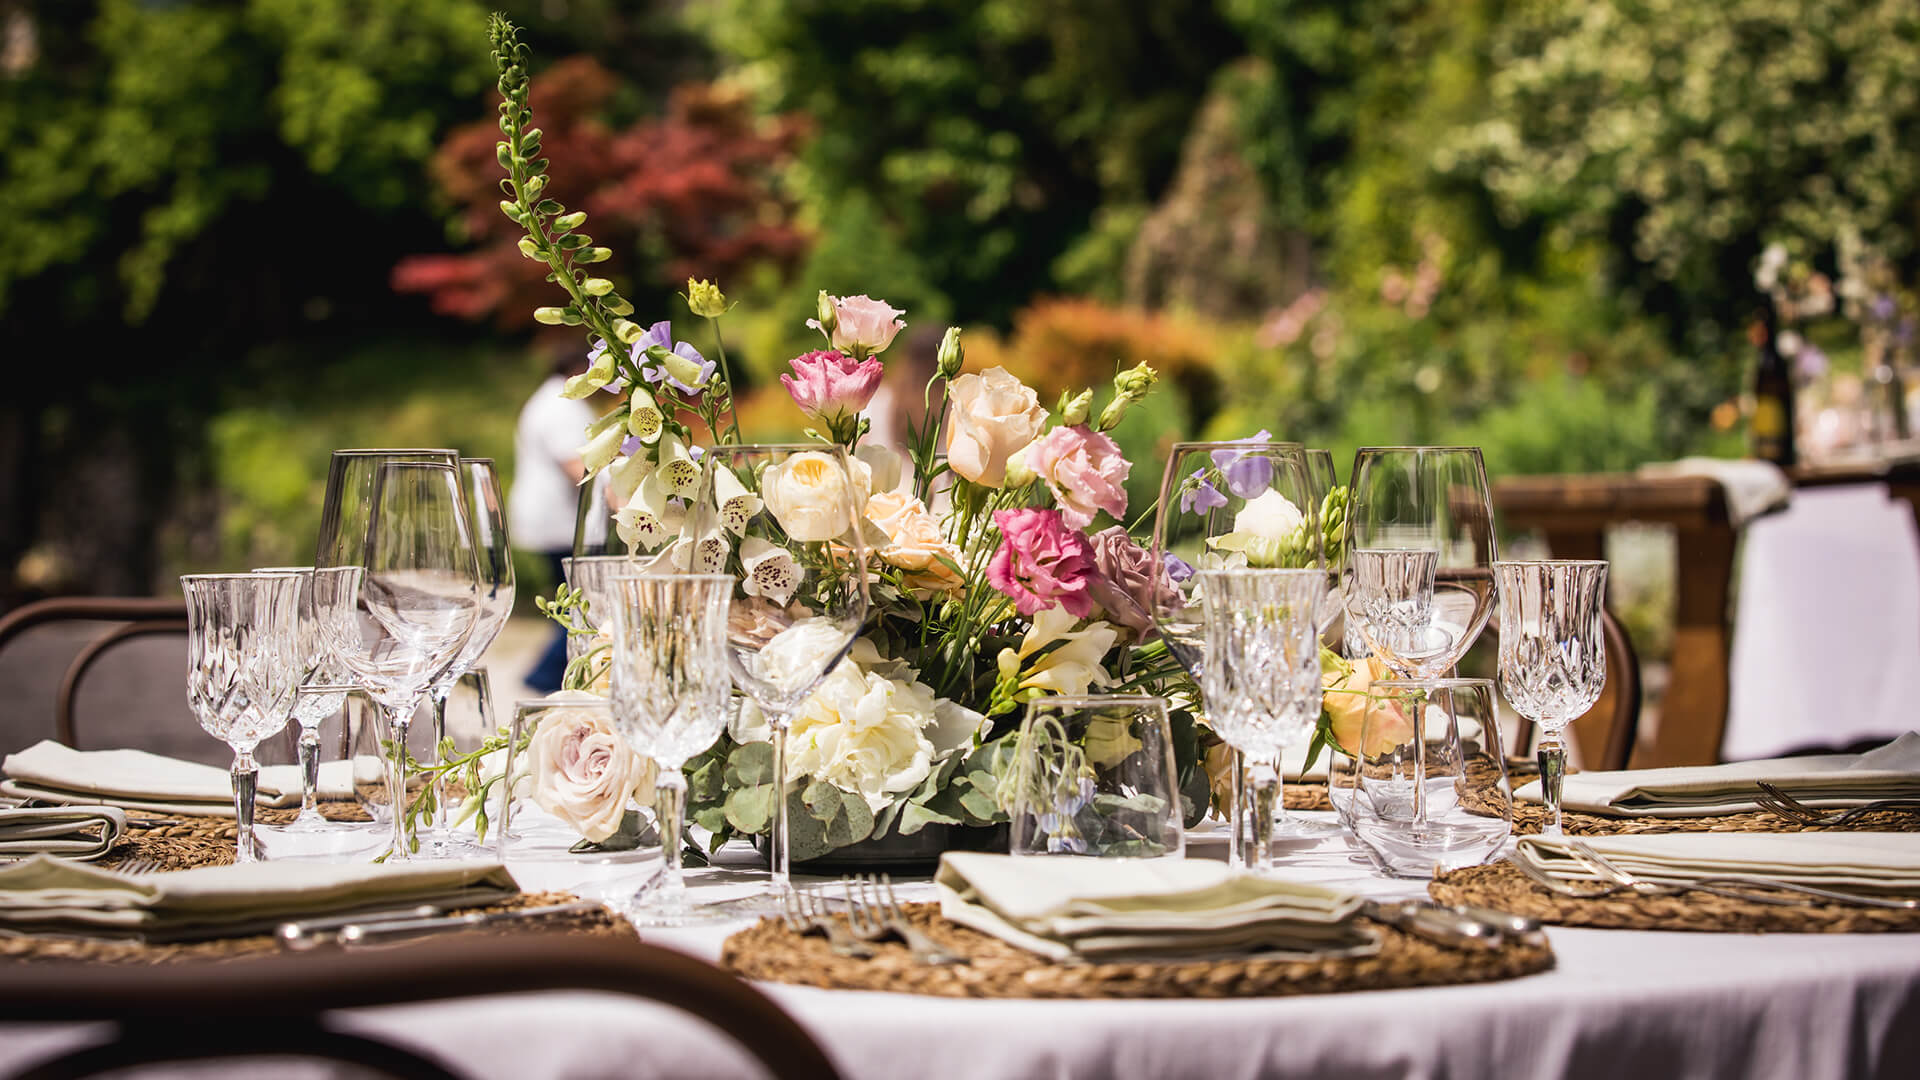 A table laid with flowers ready for guests to arrive for an al fresco lunch